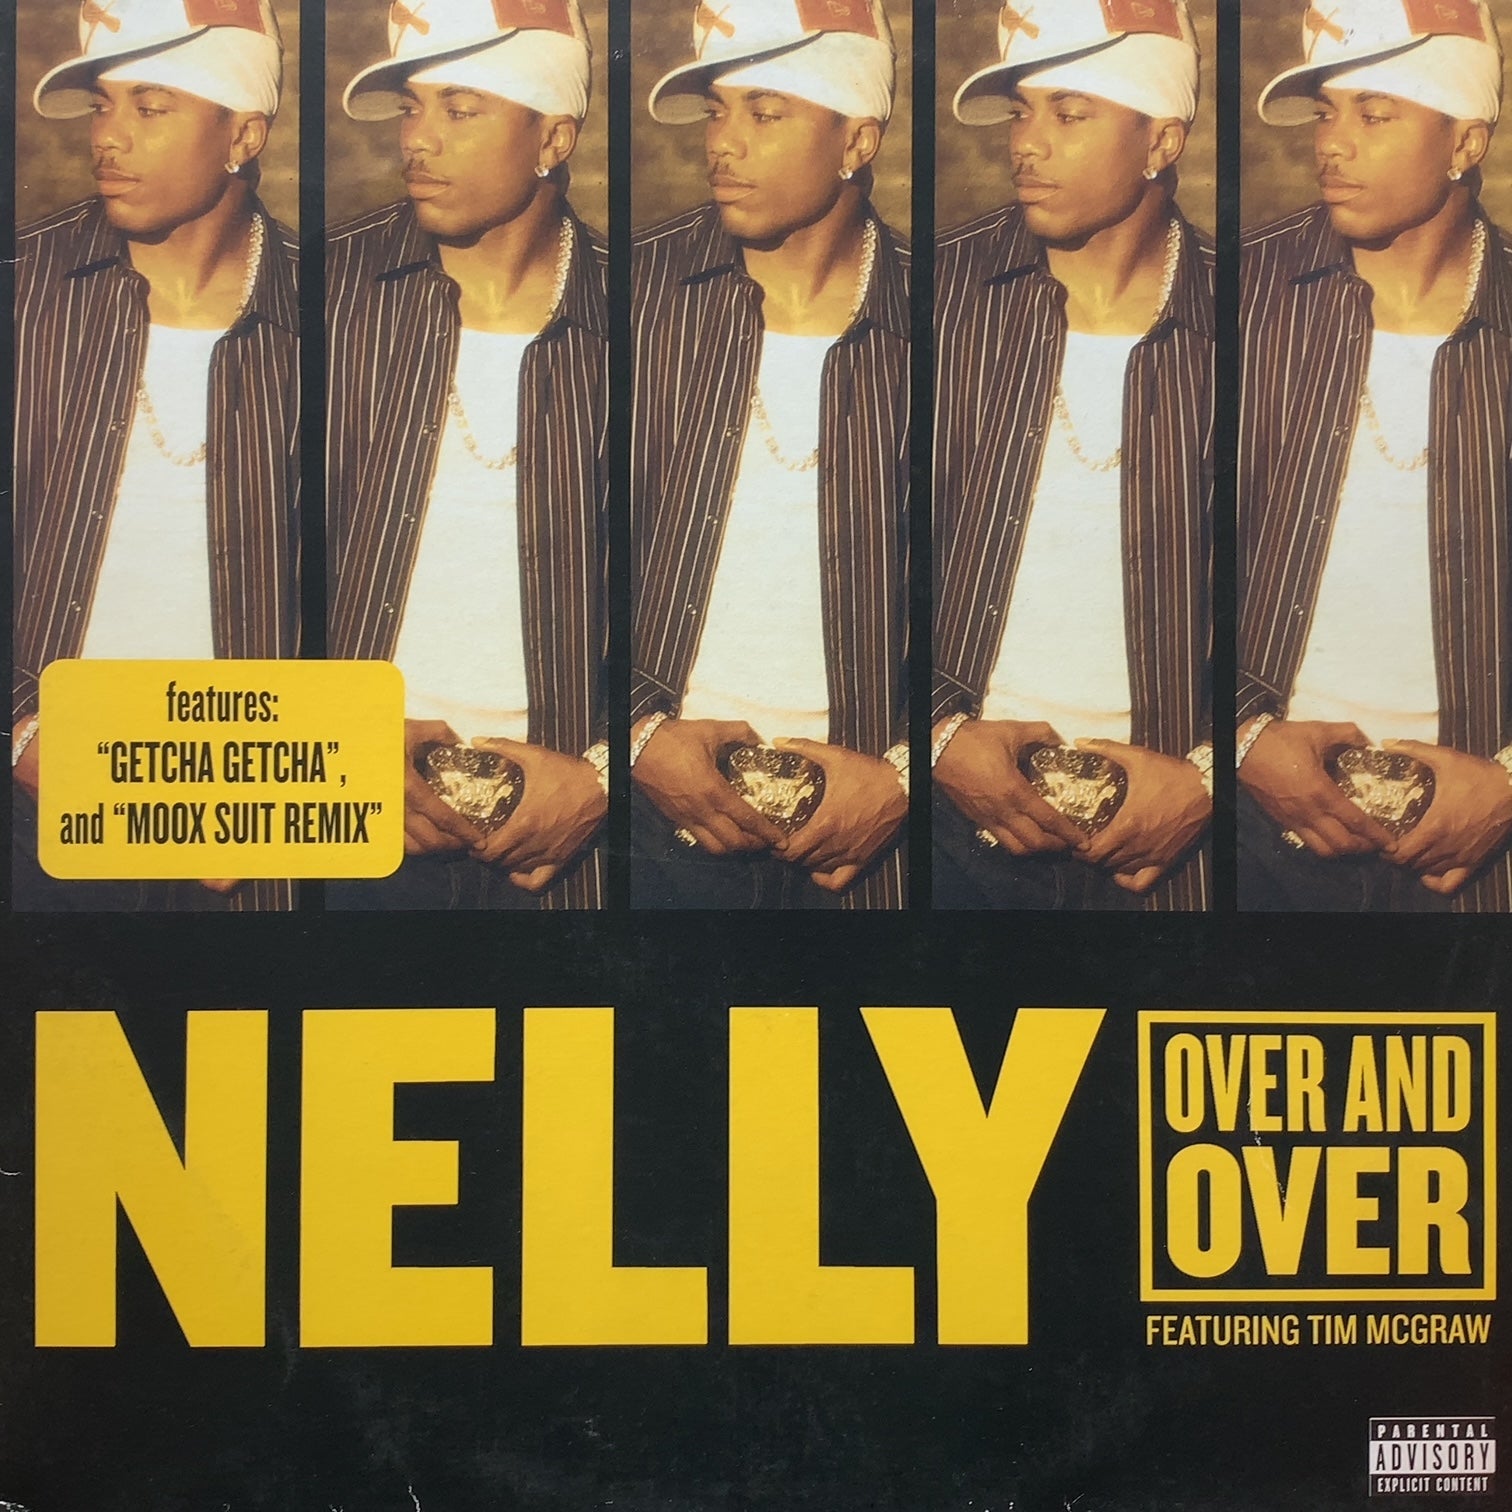 NELLY / Over And Over Featuring Tim McGraw (MCST 40402